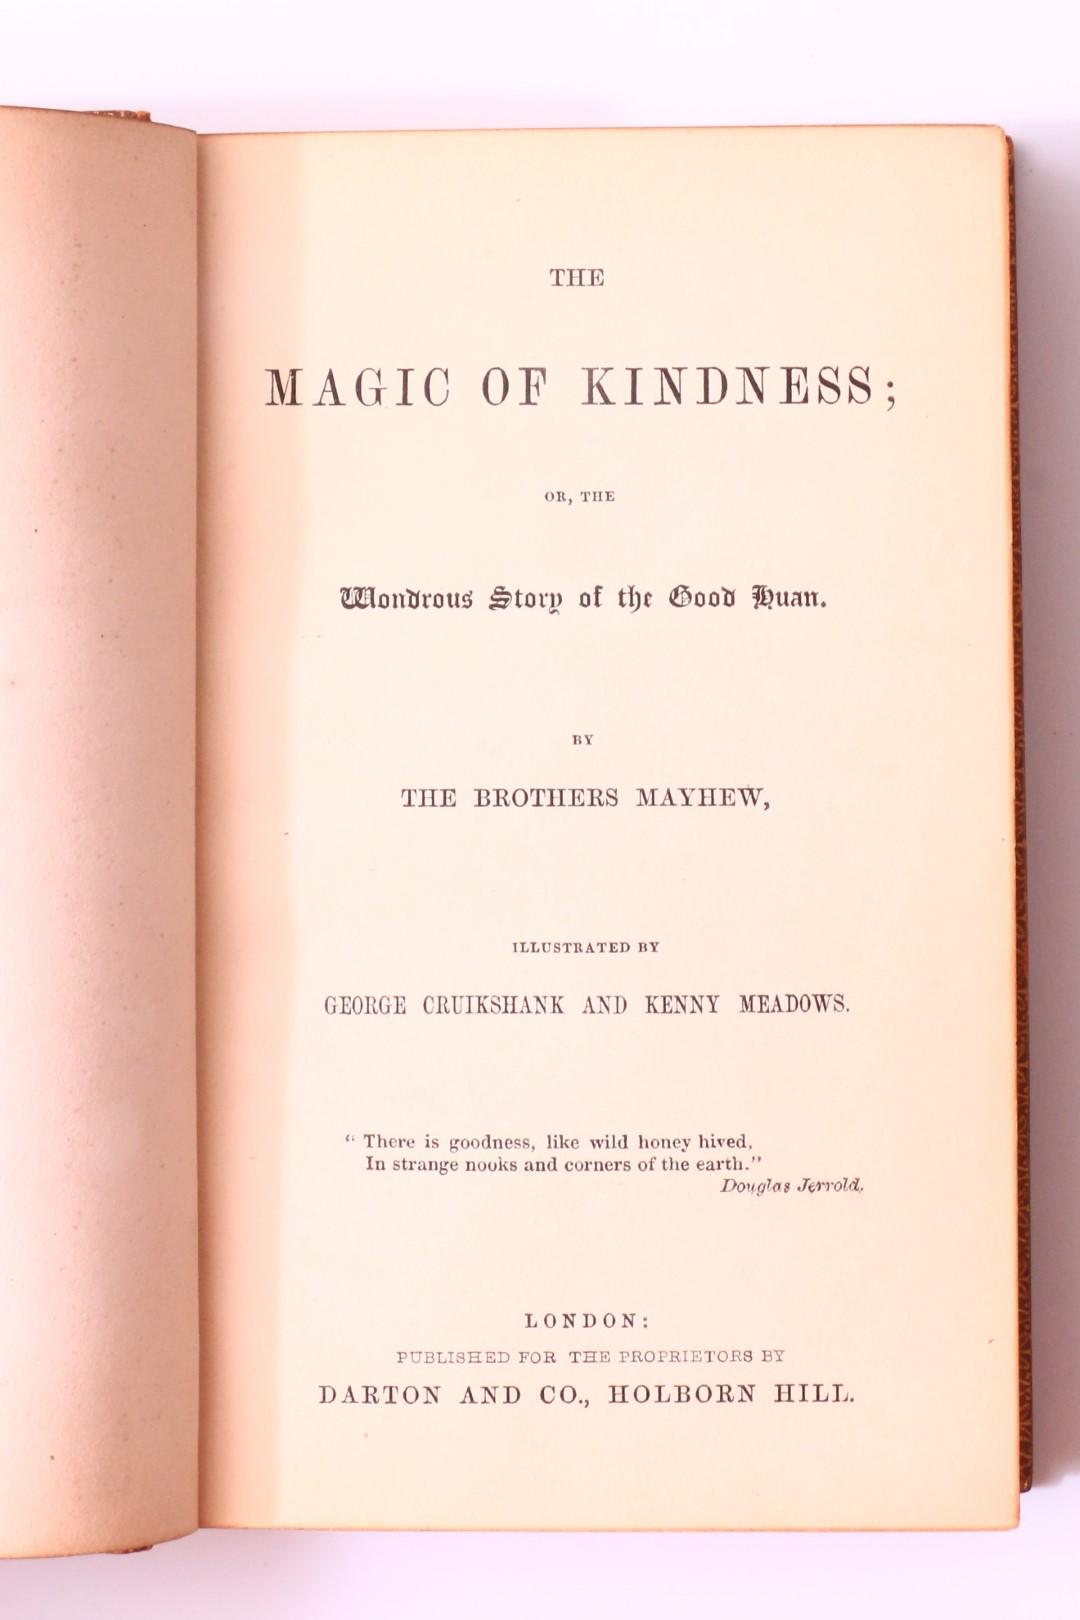 The Brothers Mayhew - The Magic of Kindness; or, the Wondrous Story of the Good Huan - Darton & Co., n.d. [1849], First Edition.